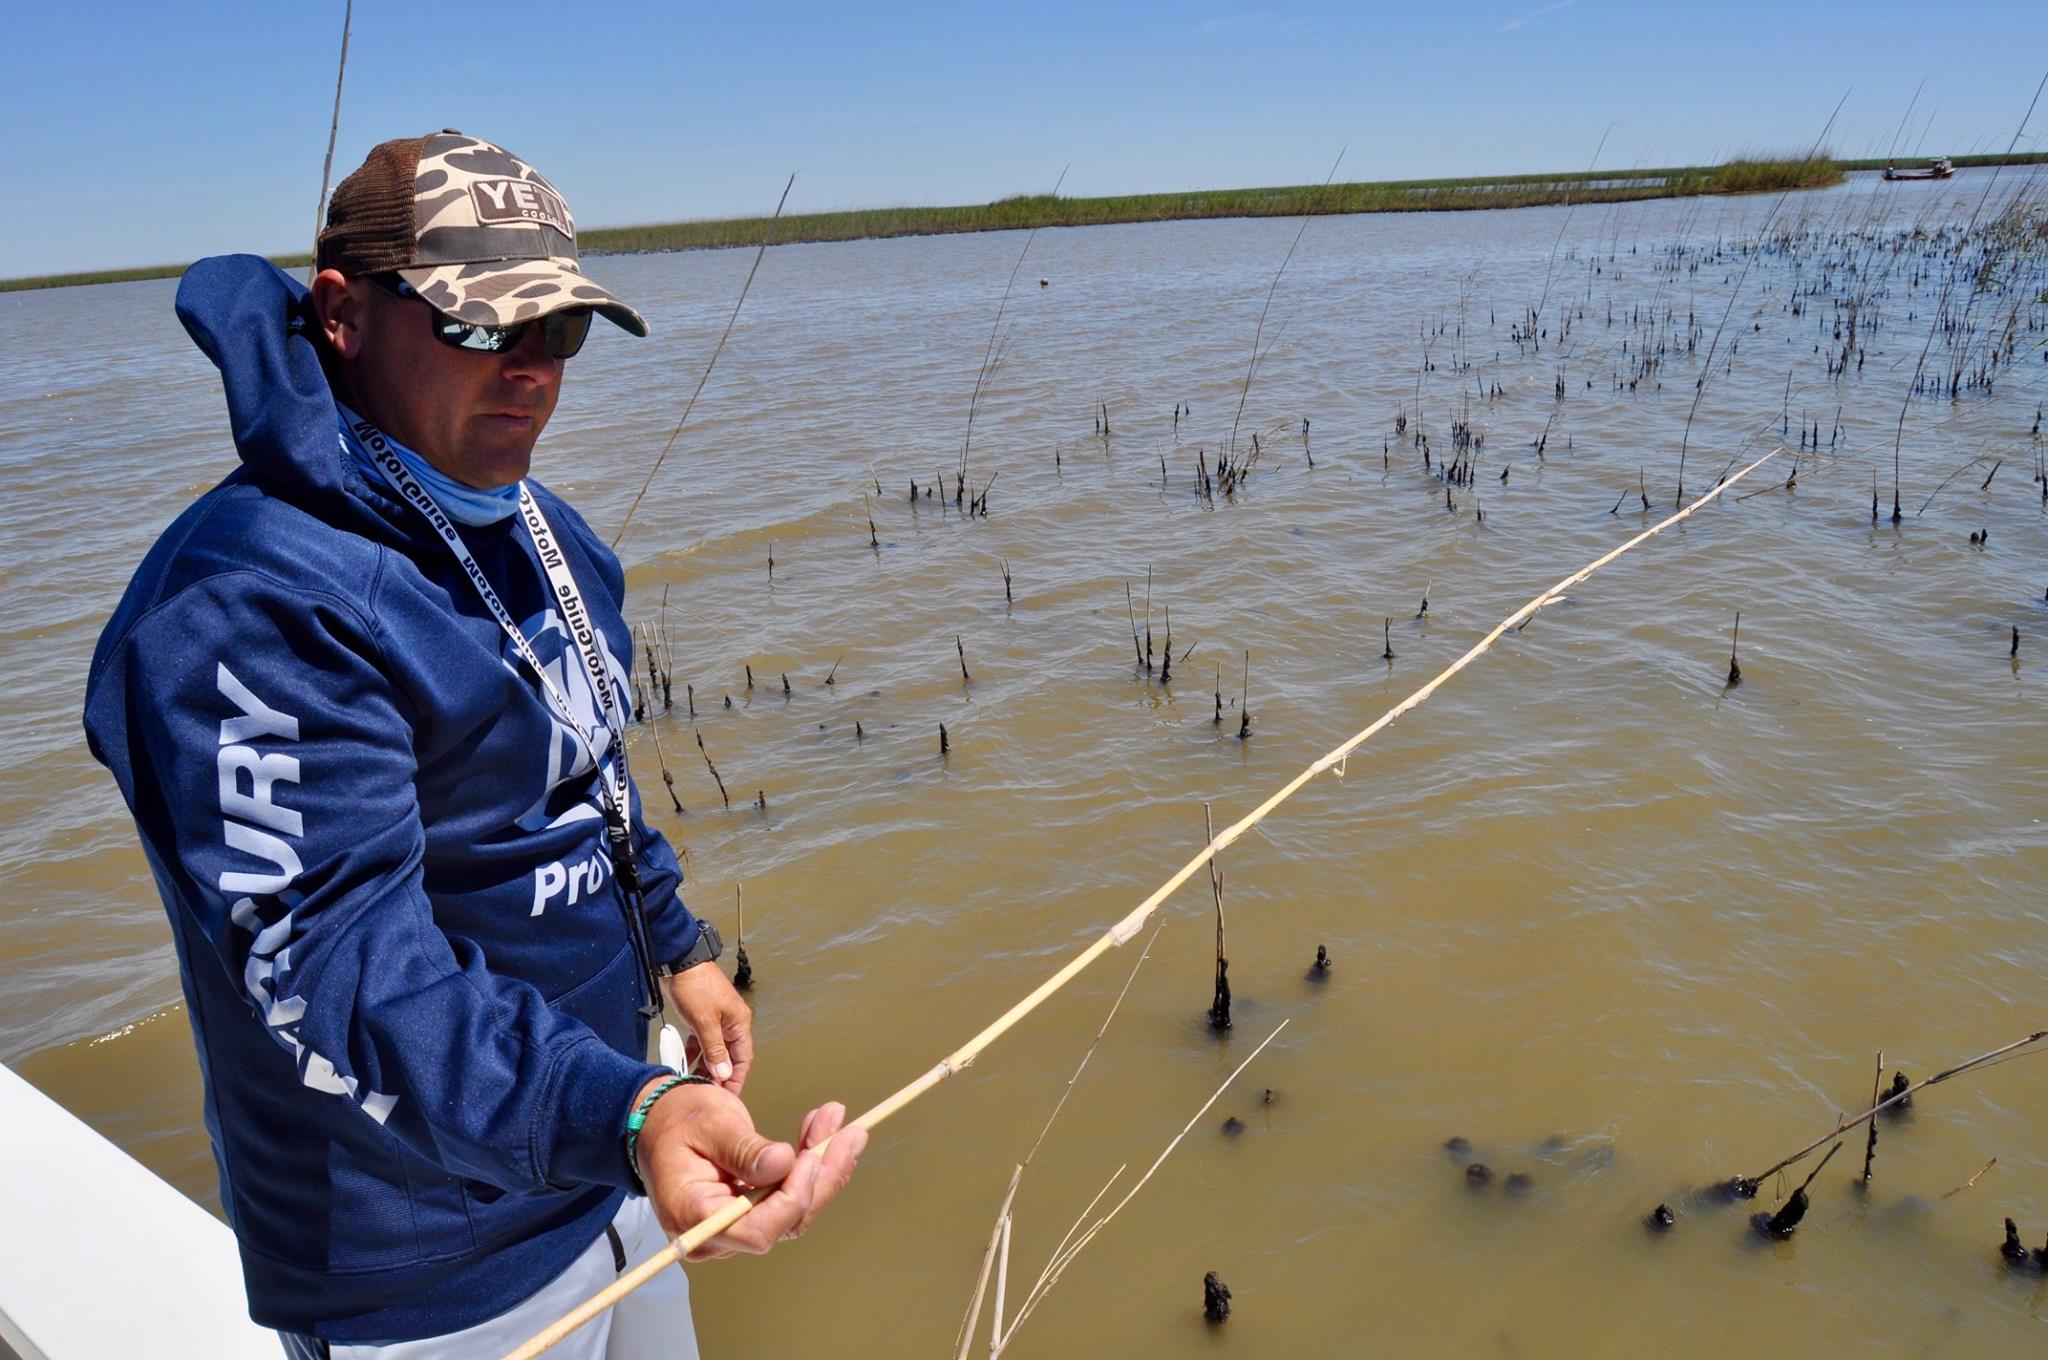 Invasive Aphids are Destroying the Best Redfish Marshes on the Planet